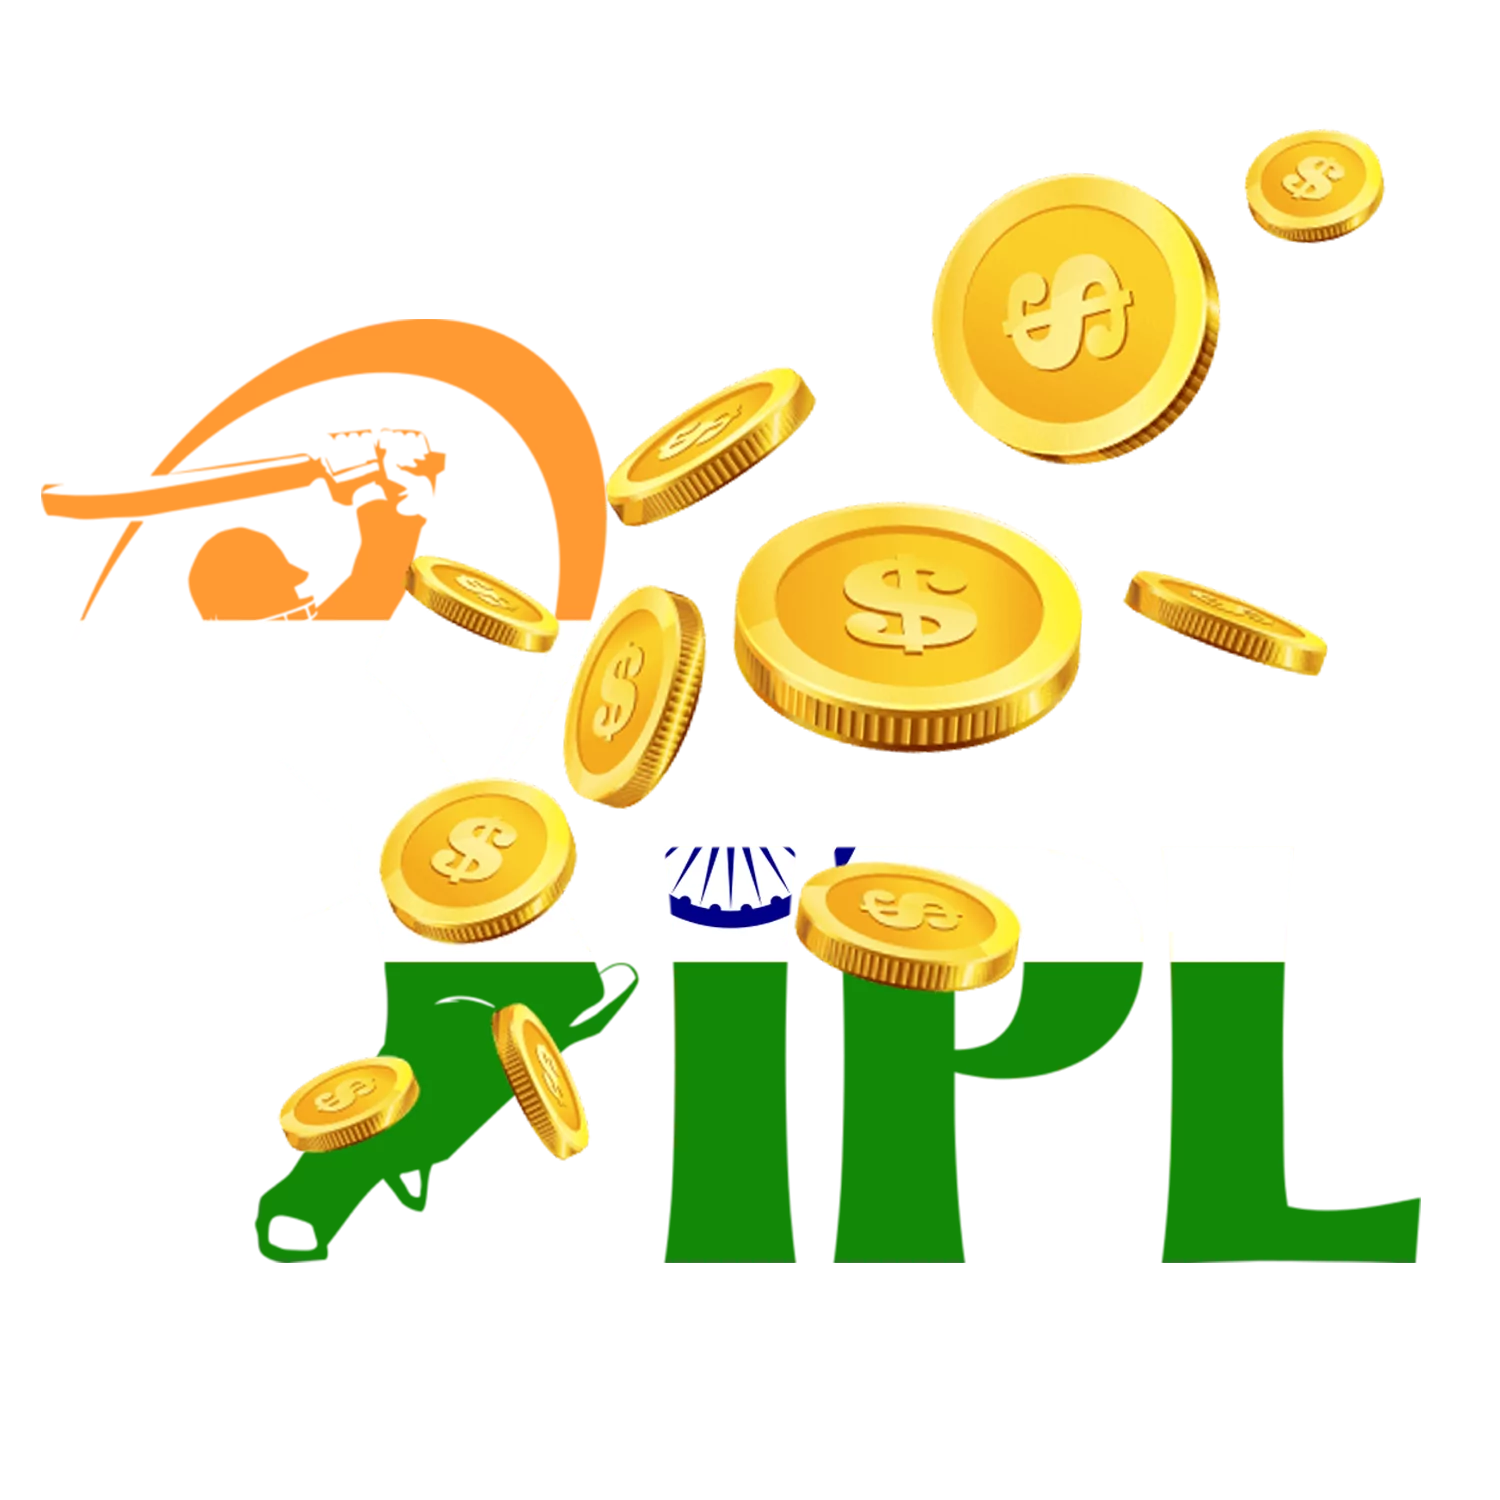 Sign up for your preferred betting webiste and start betting on the IPL events.